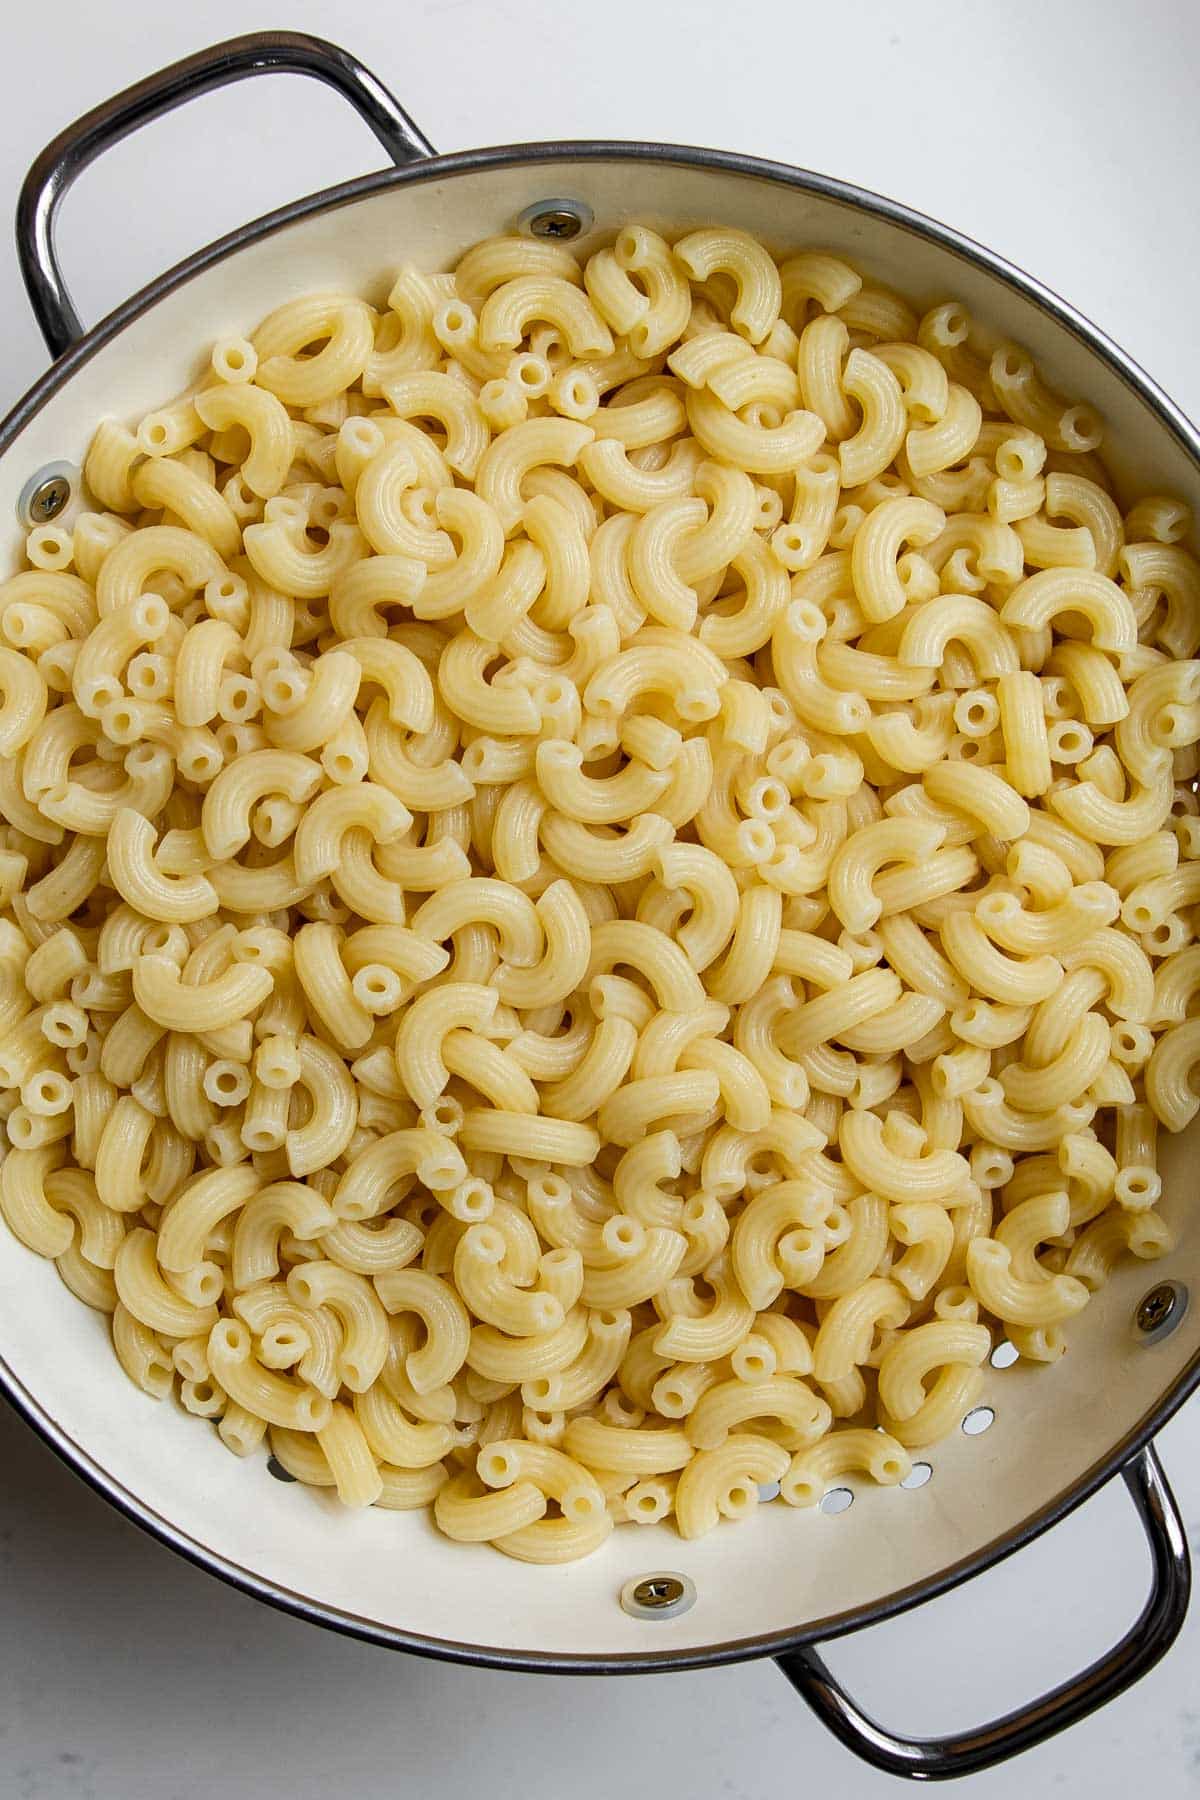 cooked macaroni noodles in a colander.